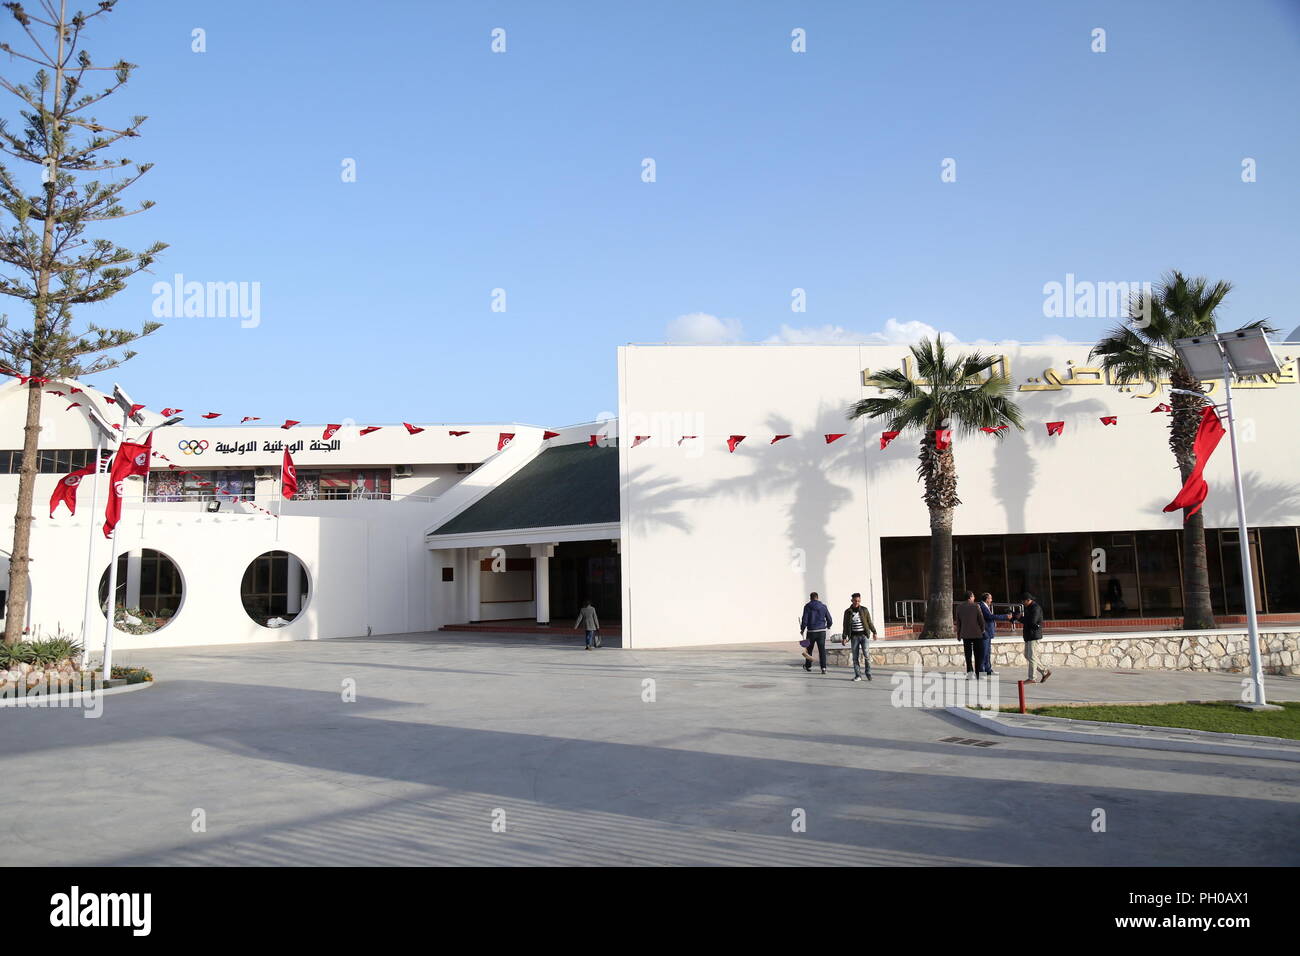 Tunis. 5th Feb, 2018. Photo taken on Feb. 5, 2018 shows the exterior of the  El Menzah Youth Sports Culture Center in Tunis, Tunisia. El Menzah Youth  Sports Culture Center, built with